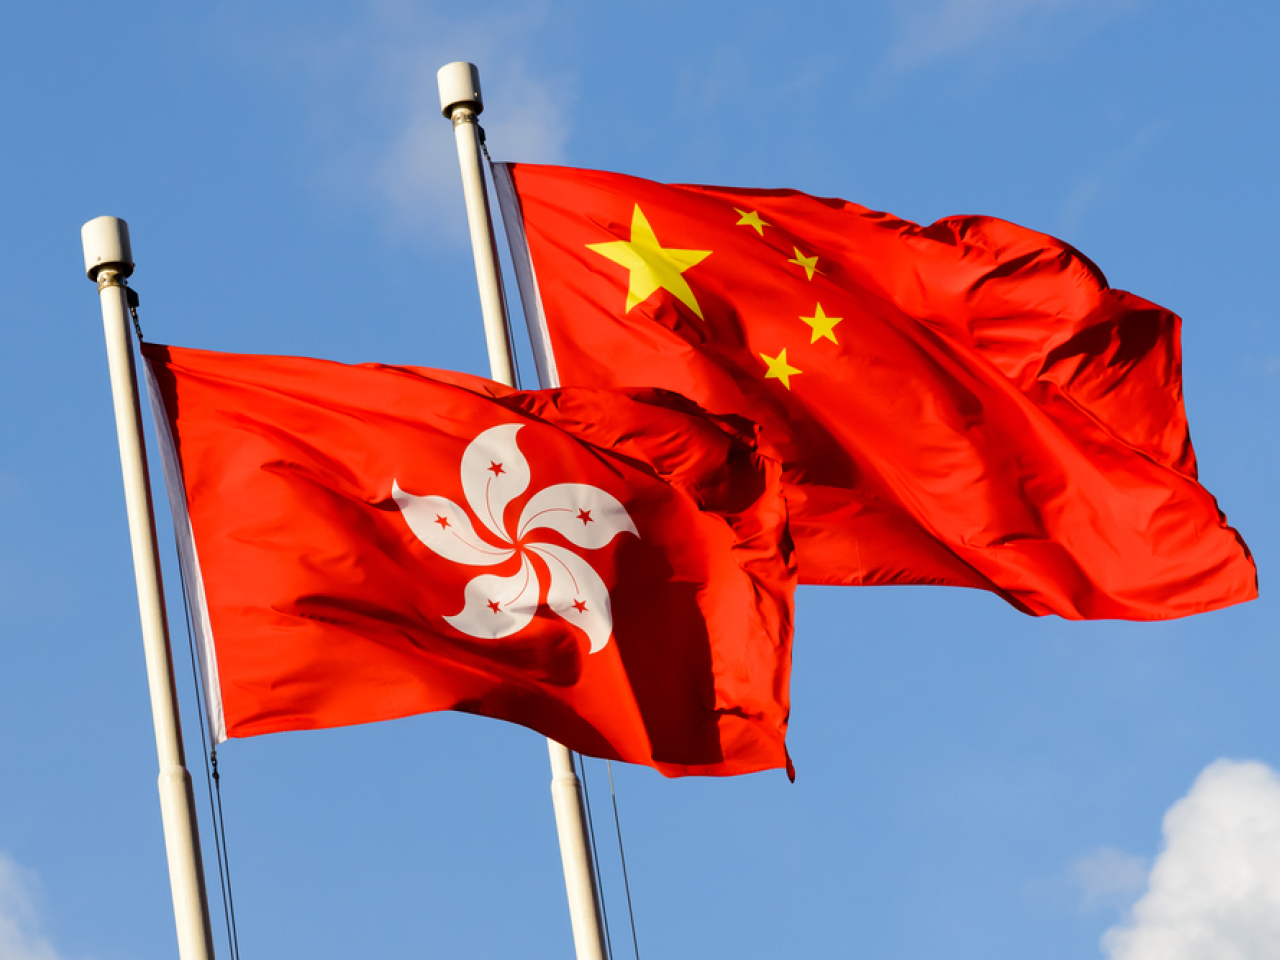 'HK to adopt soft sell tactics to promote patriotism'